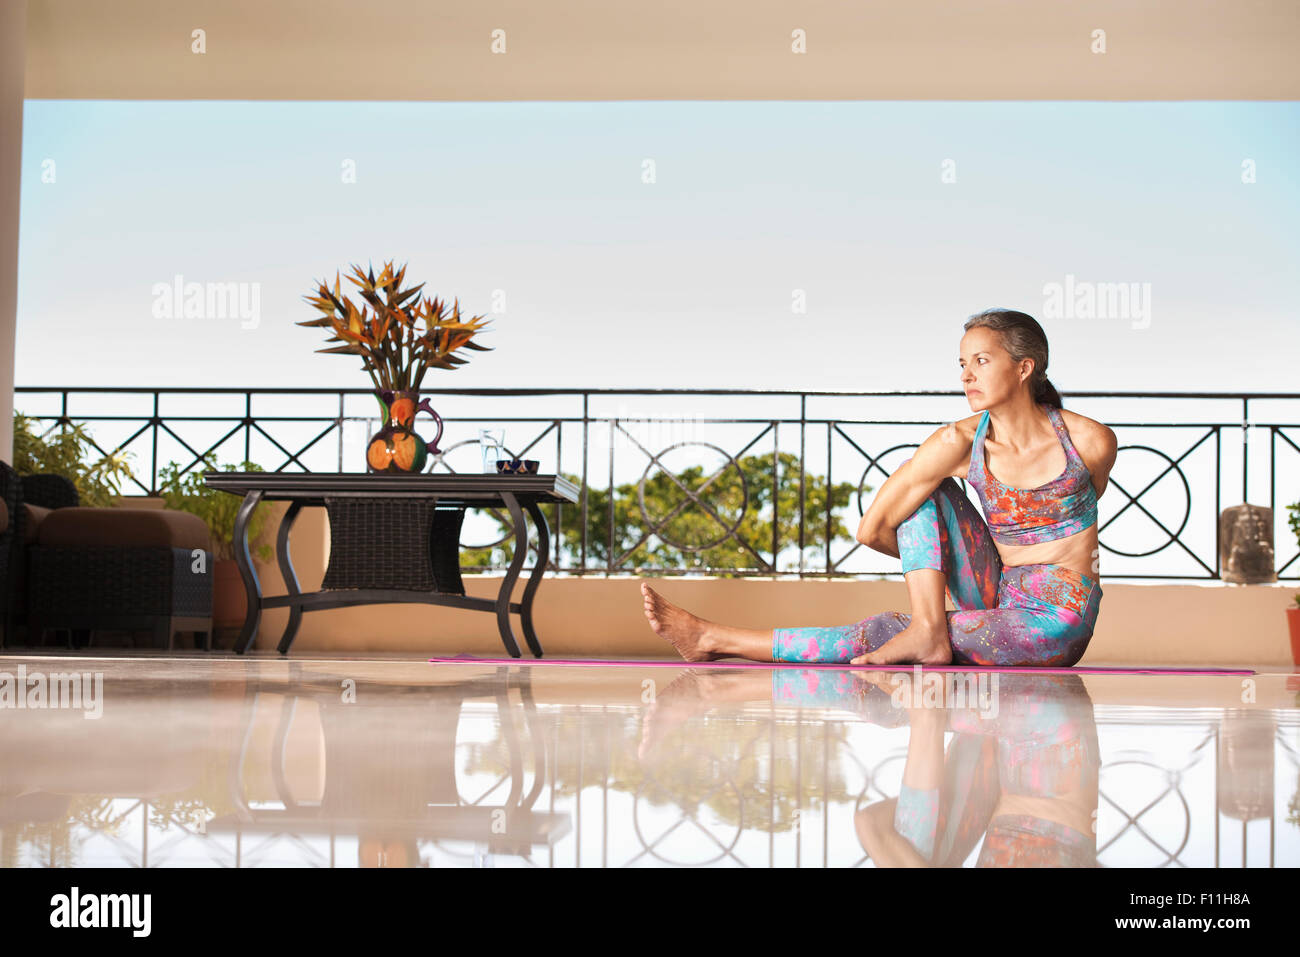 Hispanic woman practicing yoga on balcon Banque D'Images